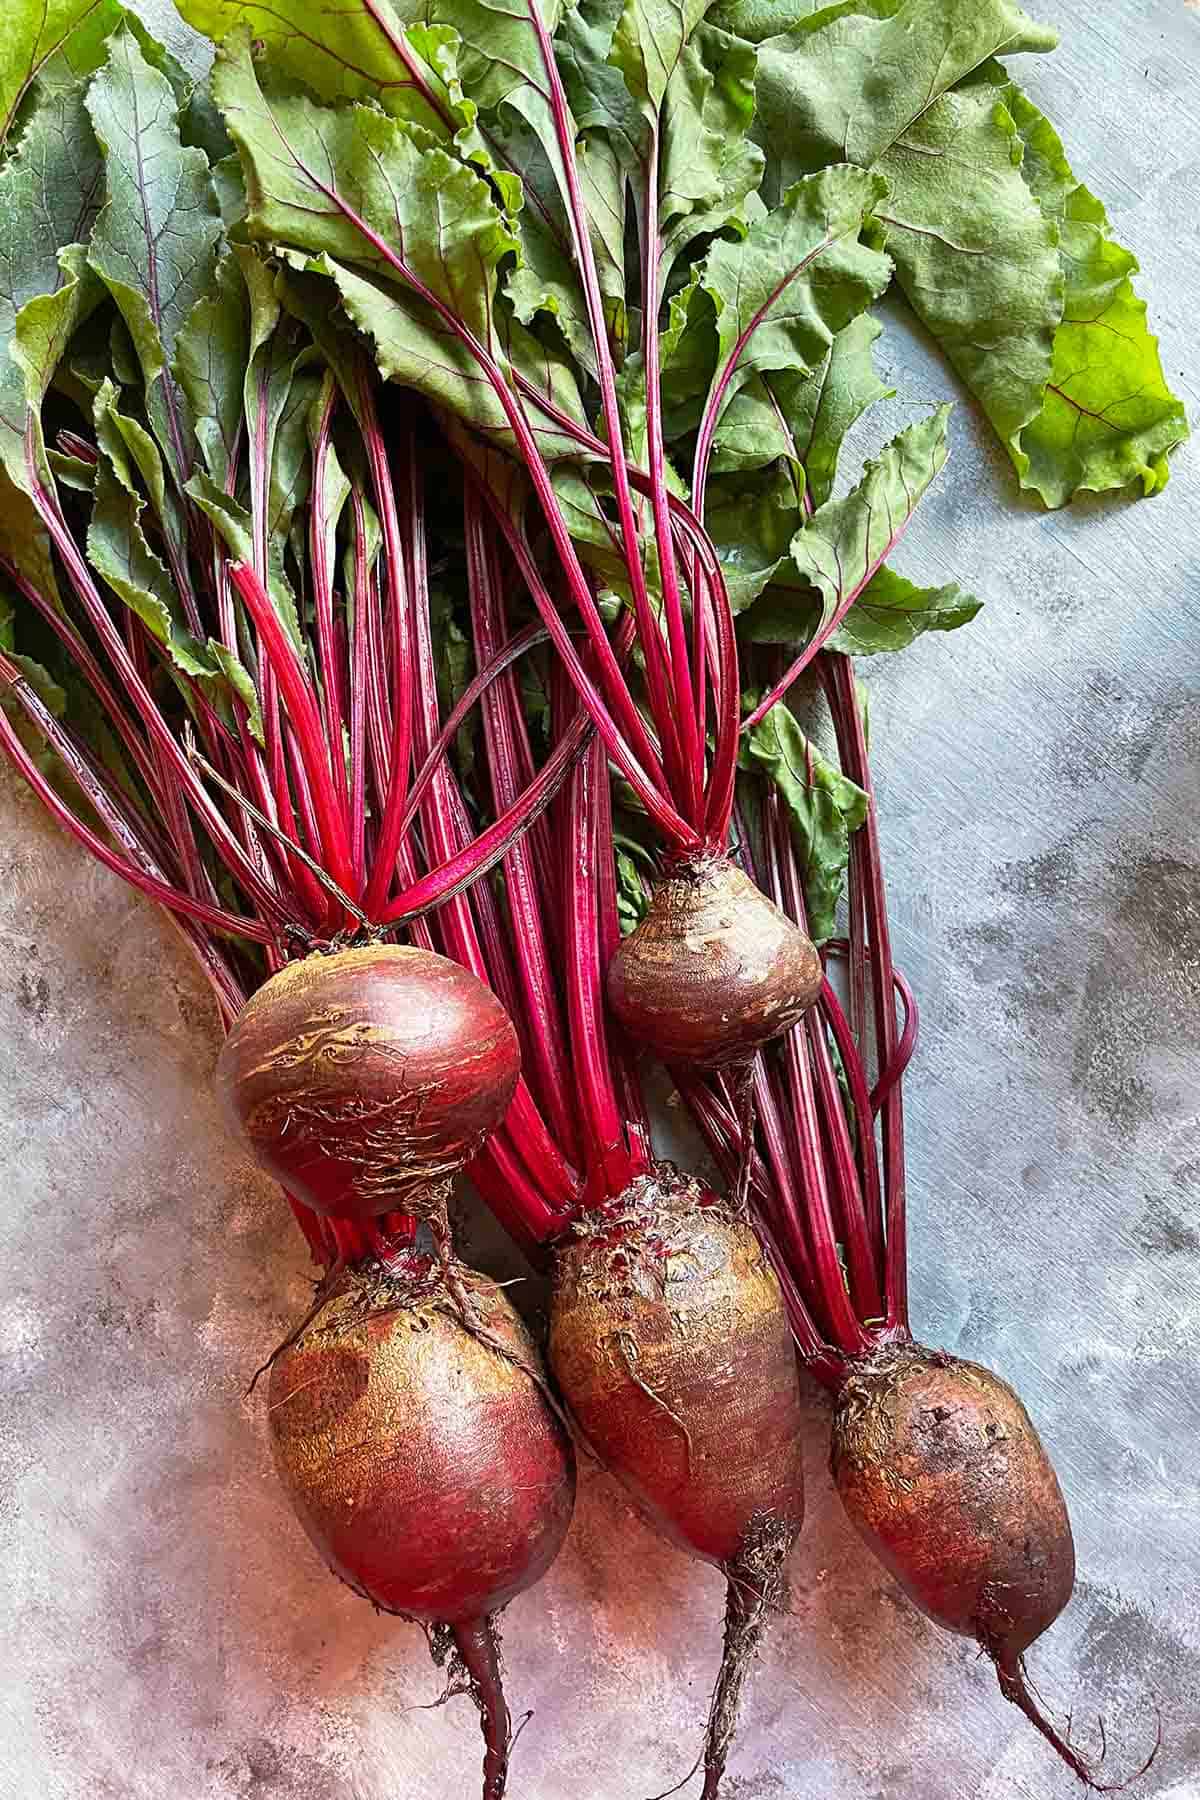 5 garden fresh beets with greens attached